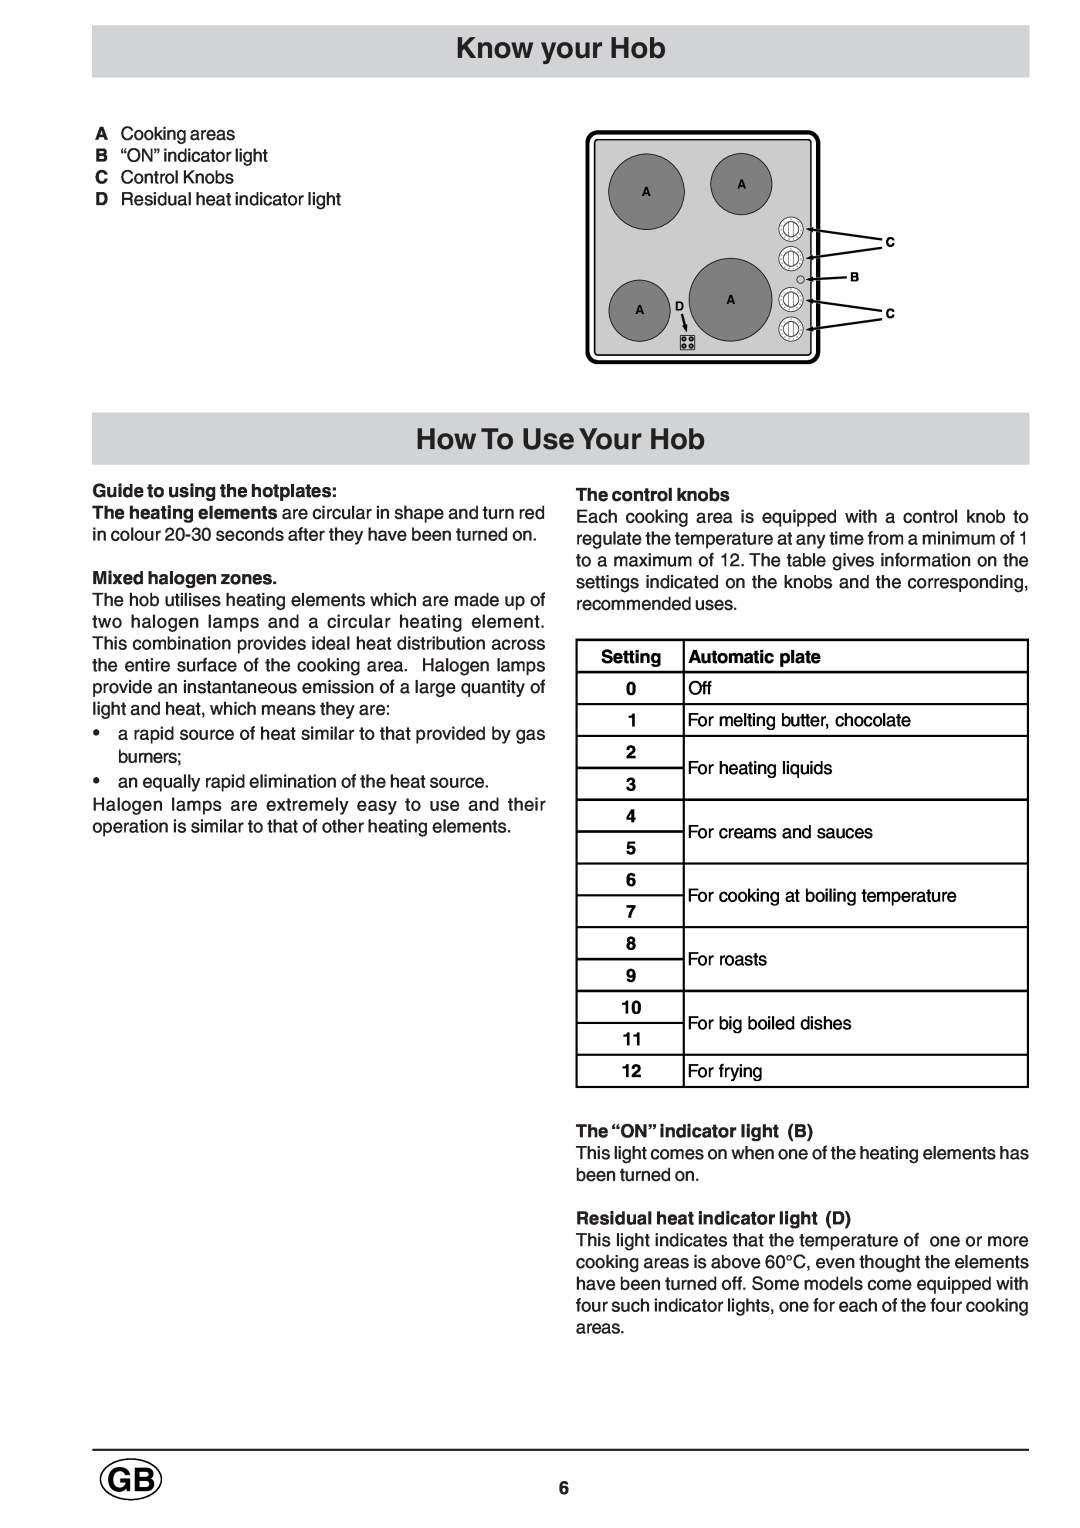 Hotpoint E600 Know your Hob, How To Use Your Hob, Guide to using the hotplates, Mixed halogen zones, The control knobs 